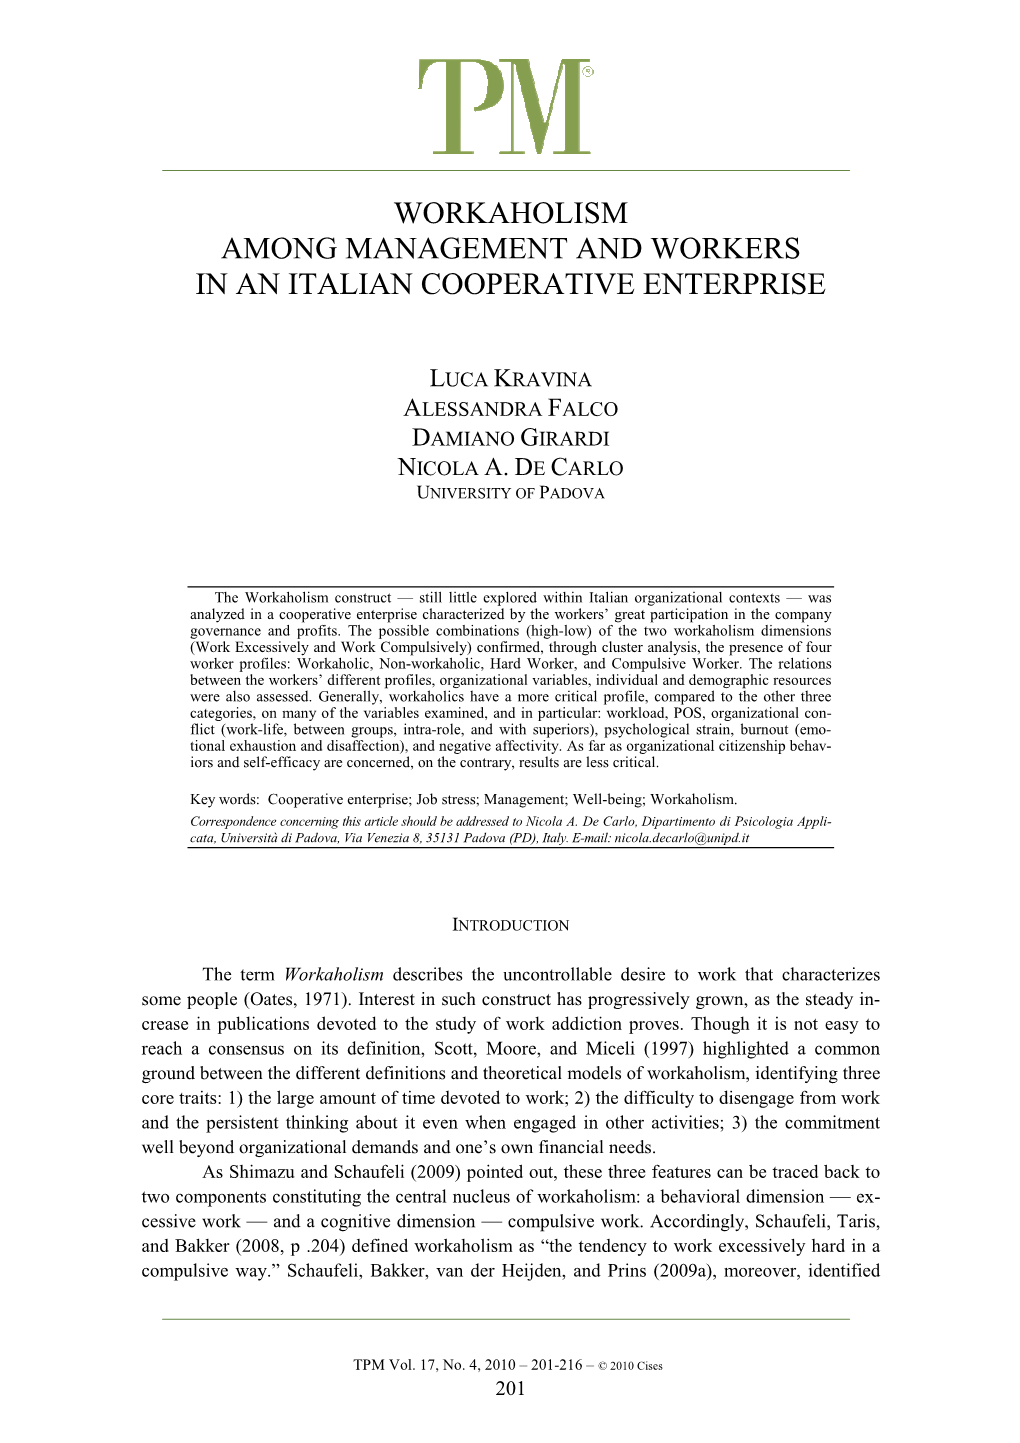 Workaholism Among Management and Workers in an Italian Cooperative Enterprise